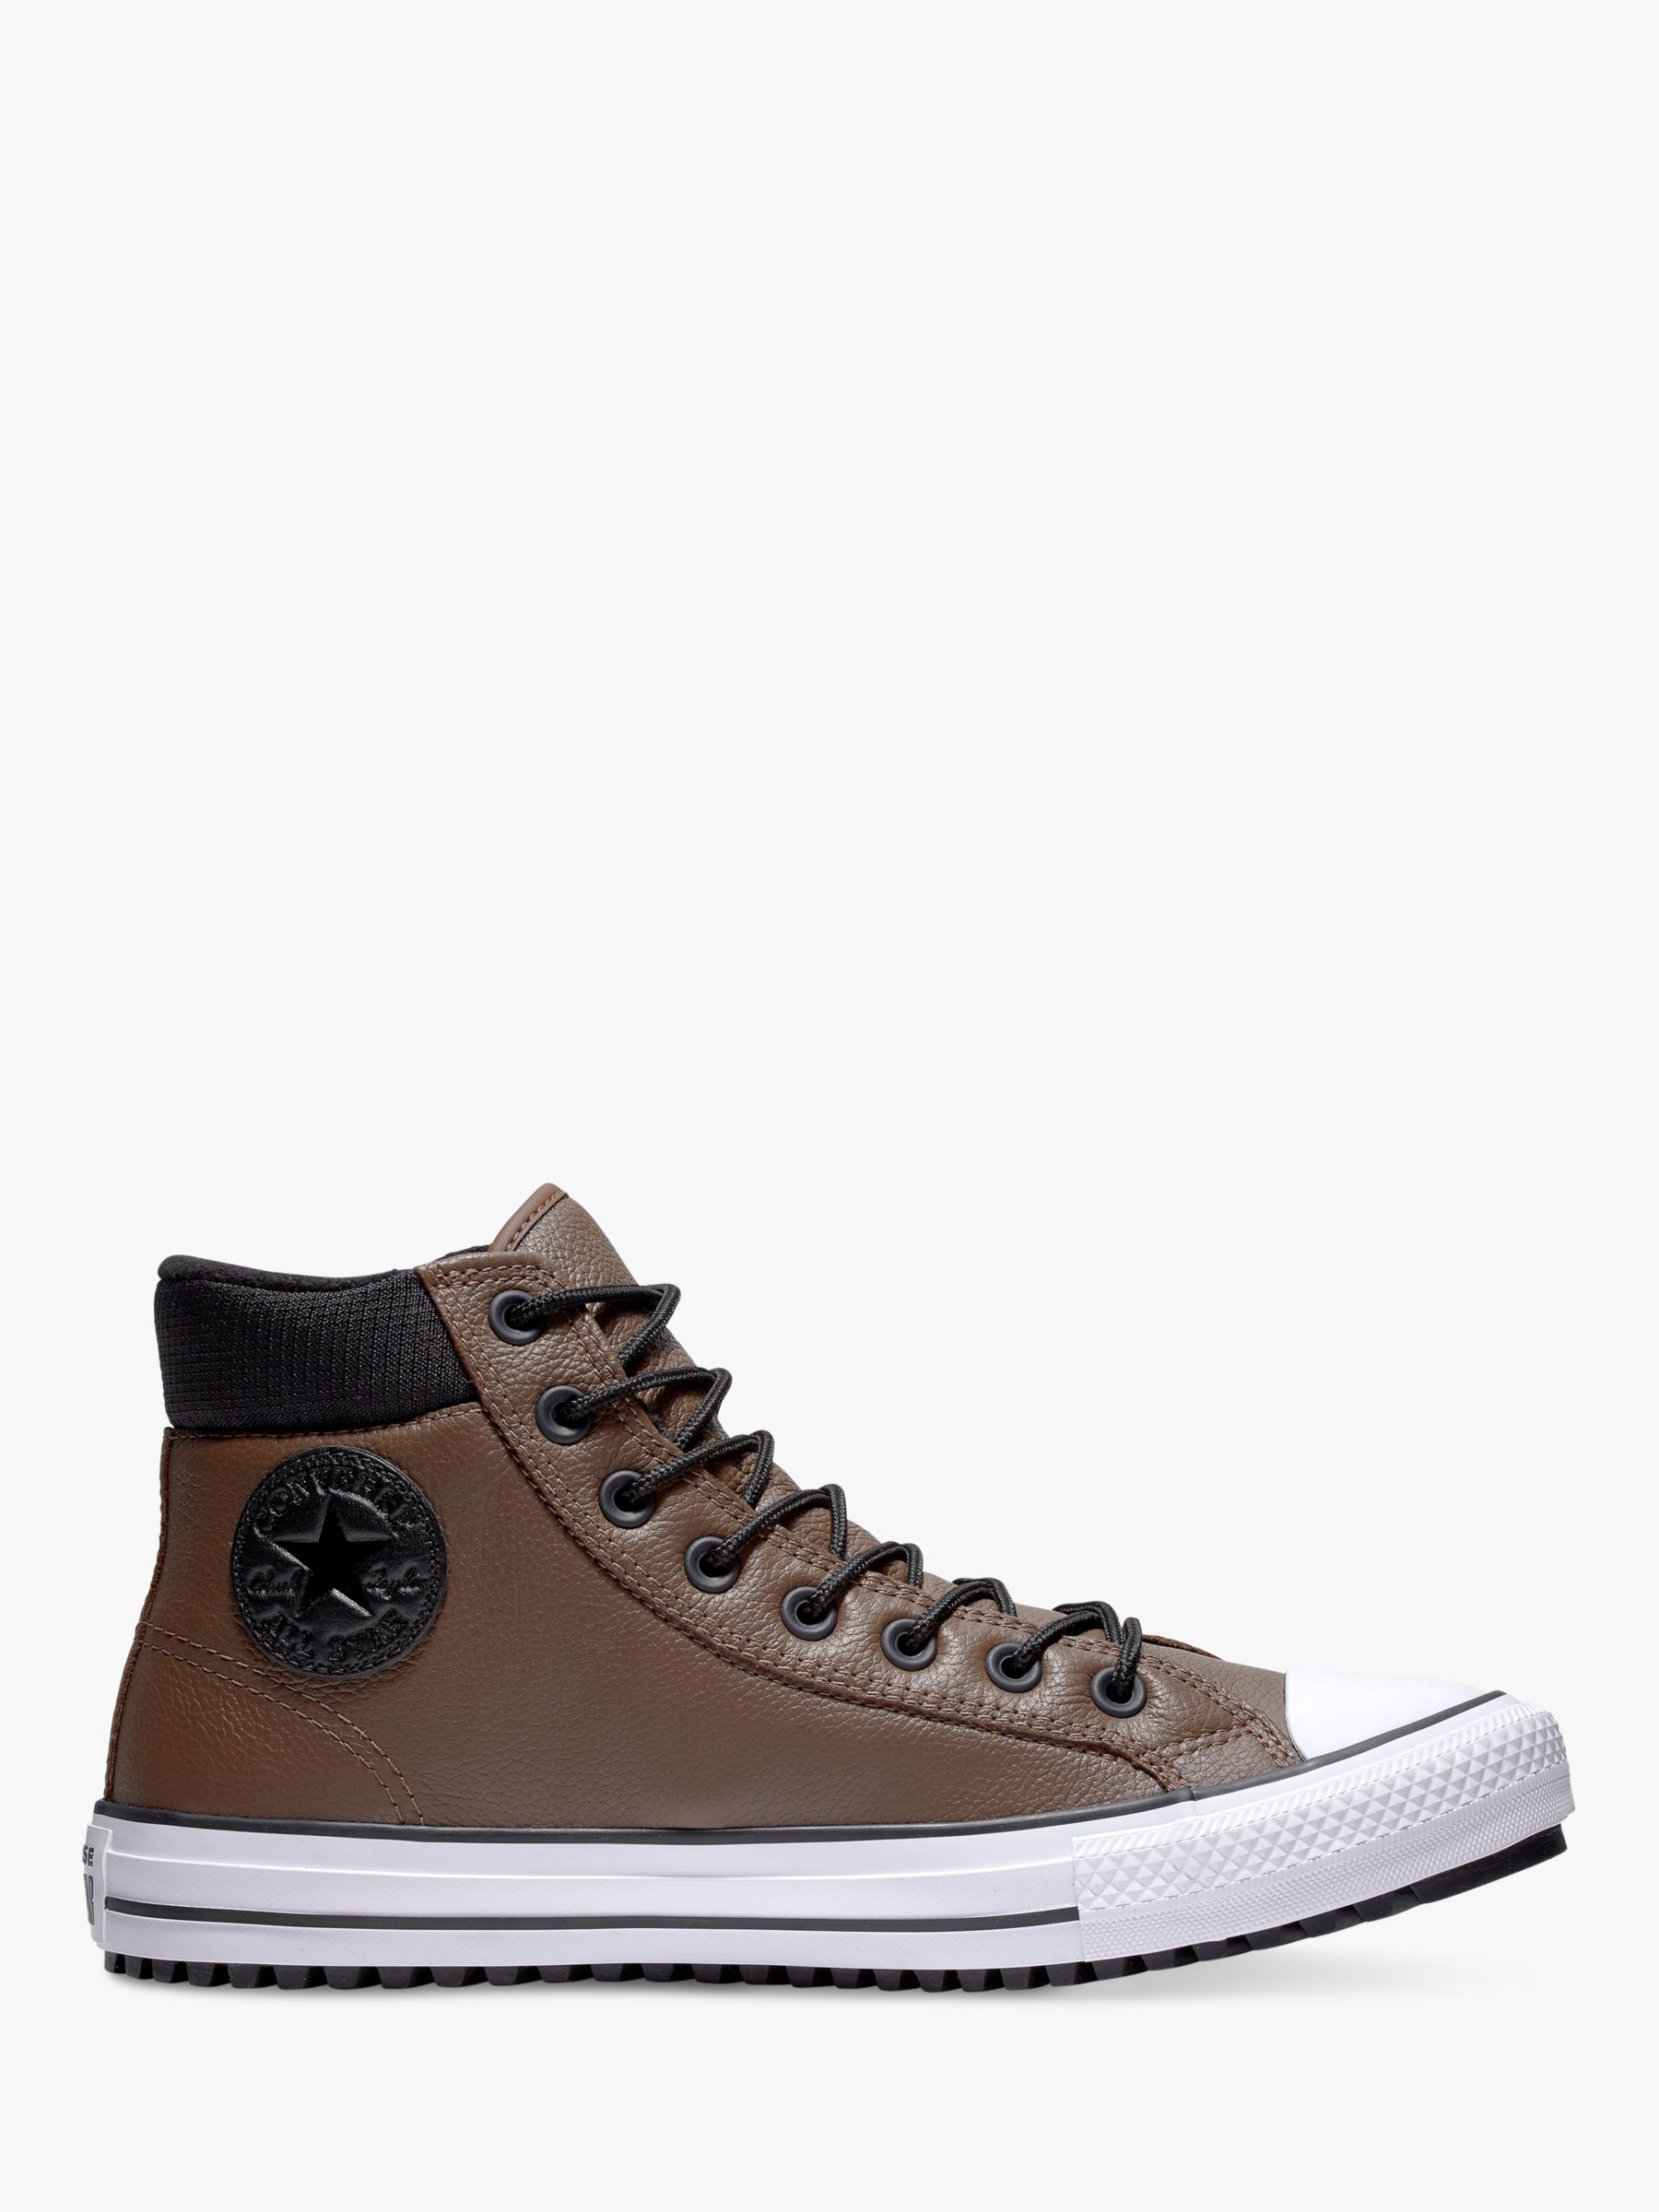 converse chuck taylor pc leather high top boot